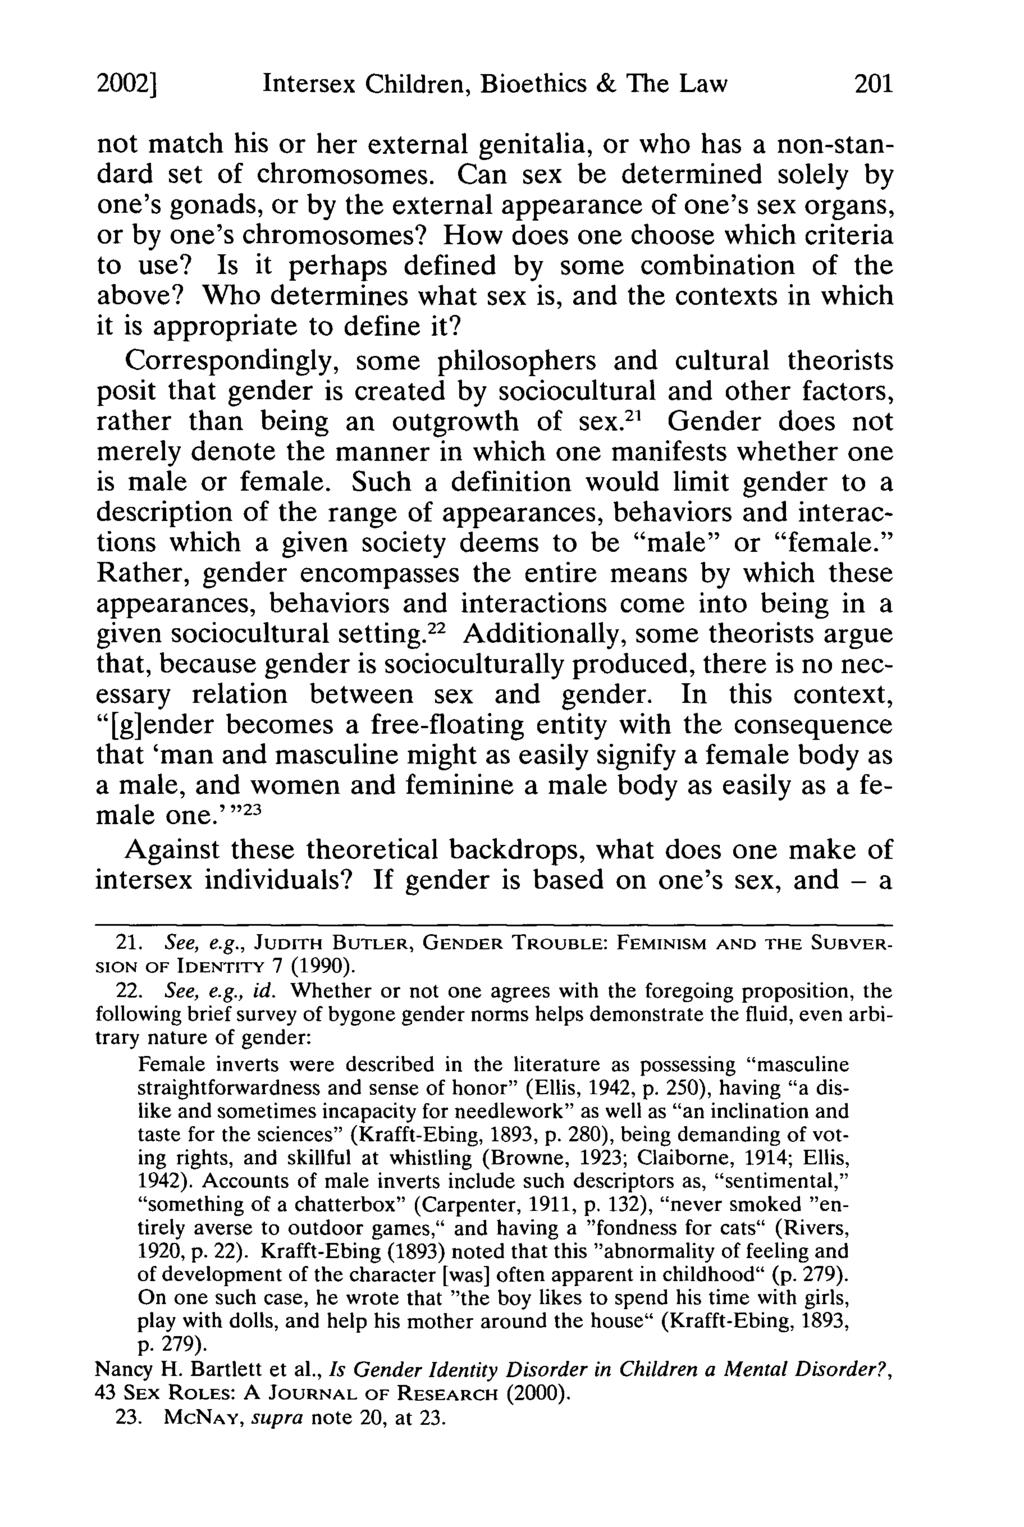 2002] Hermer: Paradigms Revised: Intersex Children, Bioethics & the Law Intersex Children, Bioethics & The Law not match his or her external genitalia, or who has a non-standard set of chromosomes.